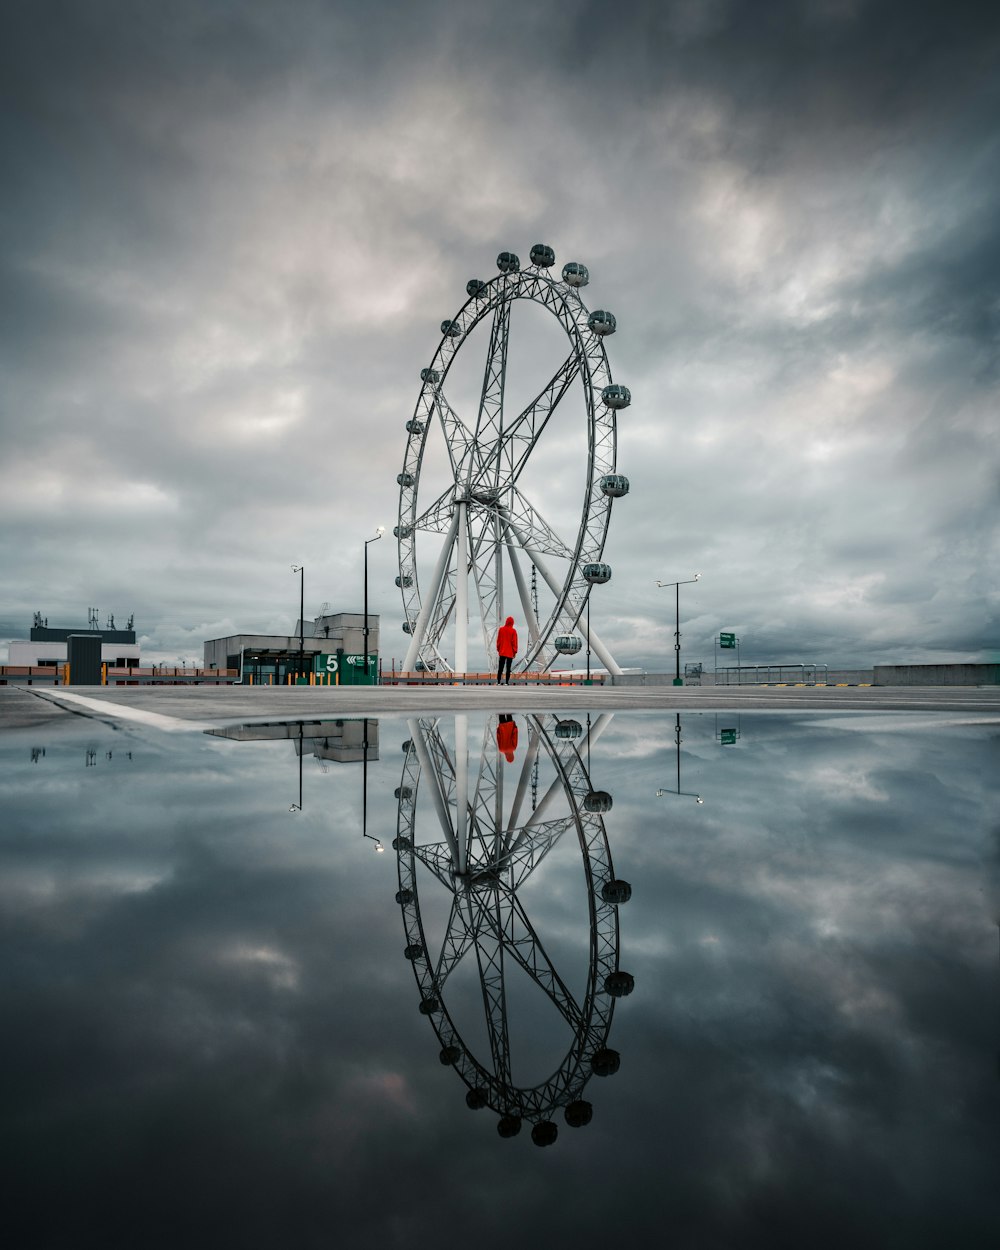 ferris wheel near body of water under cloudy sky during daytime